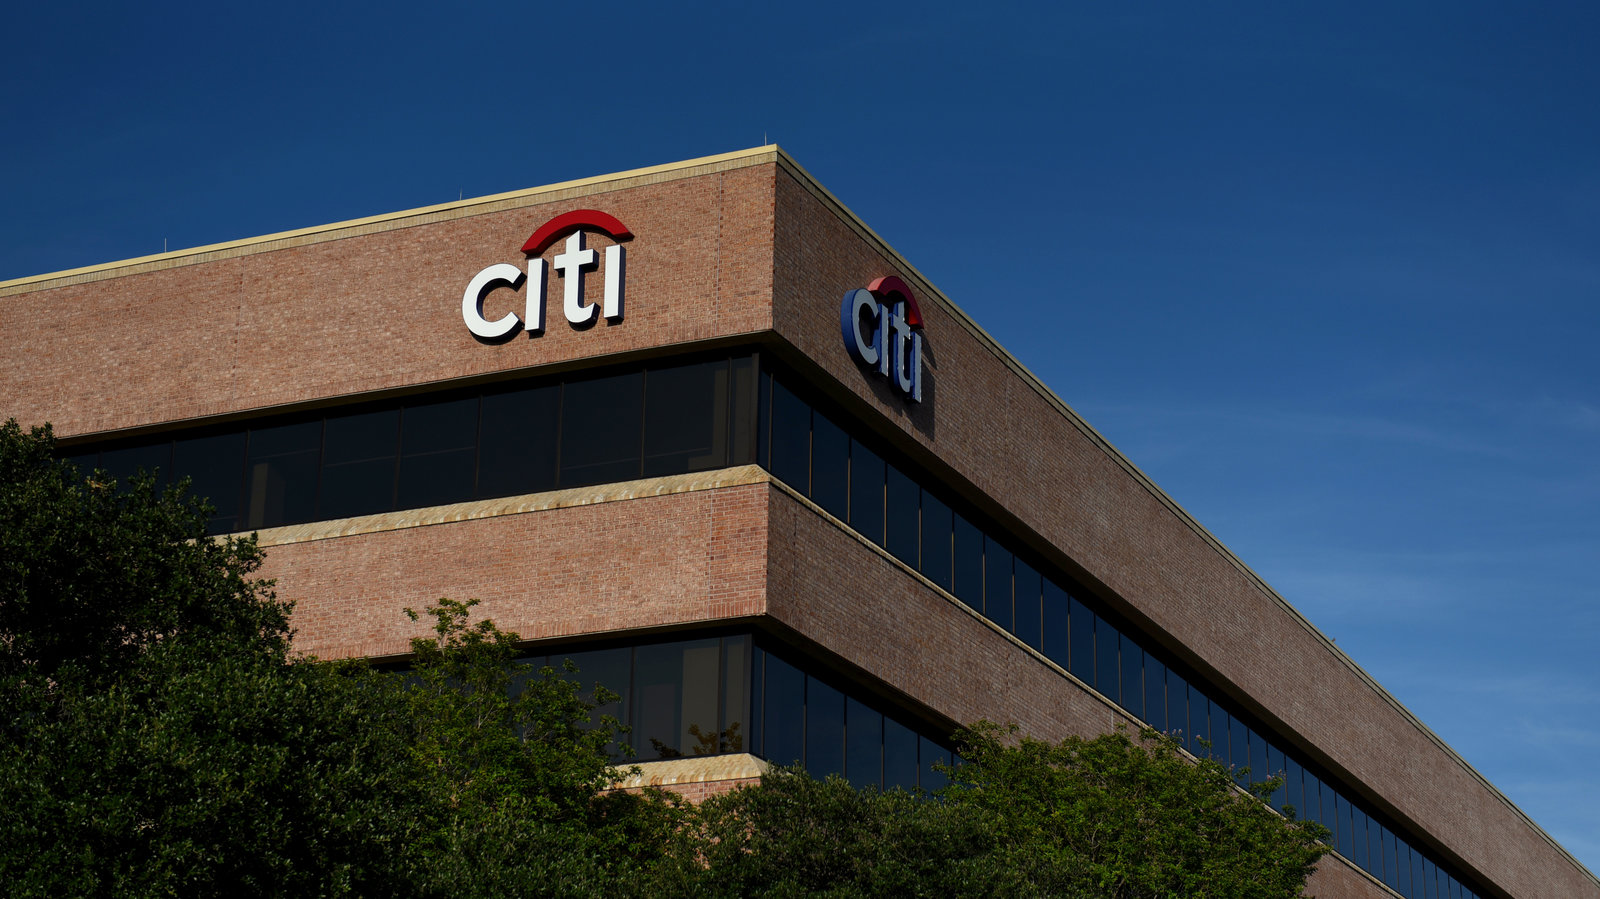 Citigroup was hit with a $46 mln fine by UK regulators over a $1.4 bln "fat finger" trading blunder that sent shockwaves across European markets.